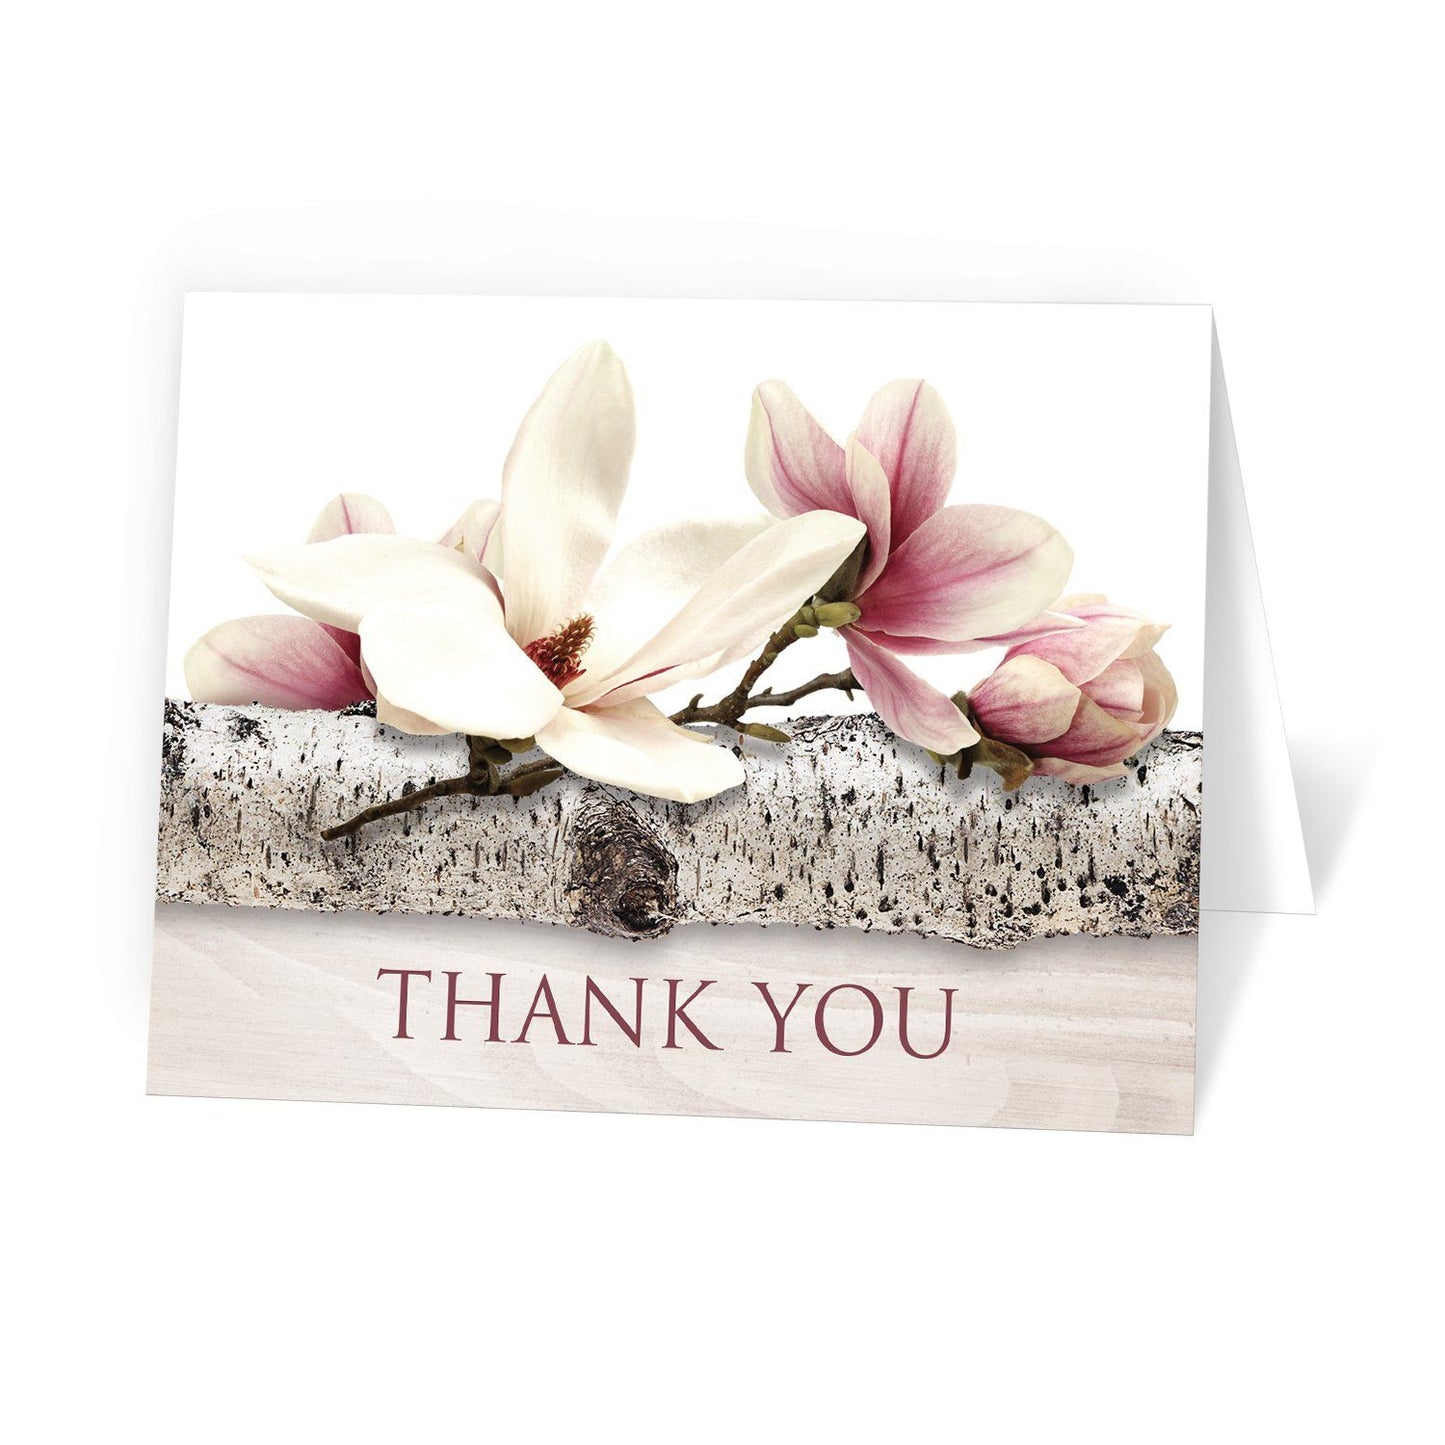 Magnolia Birch Light Wood Floral - Magnolia Thank You Cards at Artistically Invited